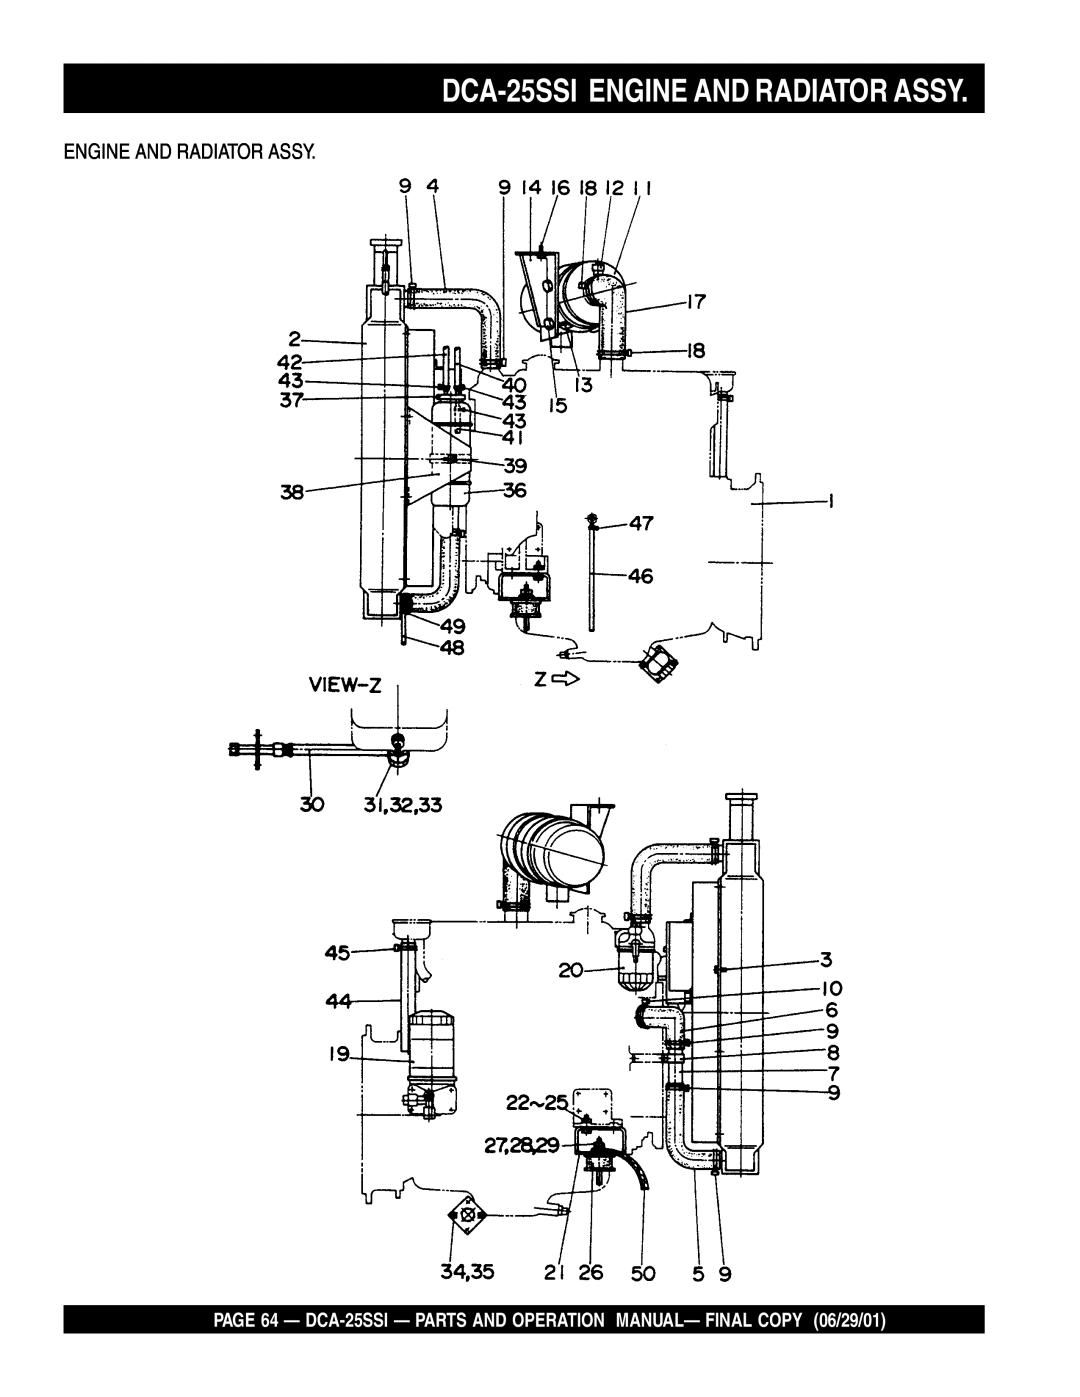 Multiquip operation manual DCA-25SSIENGINE AND RADIATOR ASSY, Engine And Radiator Assy 